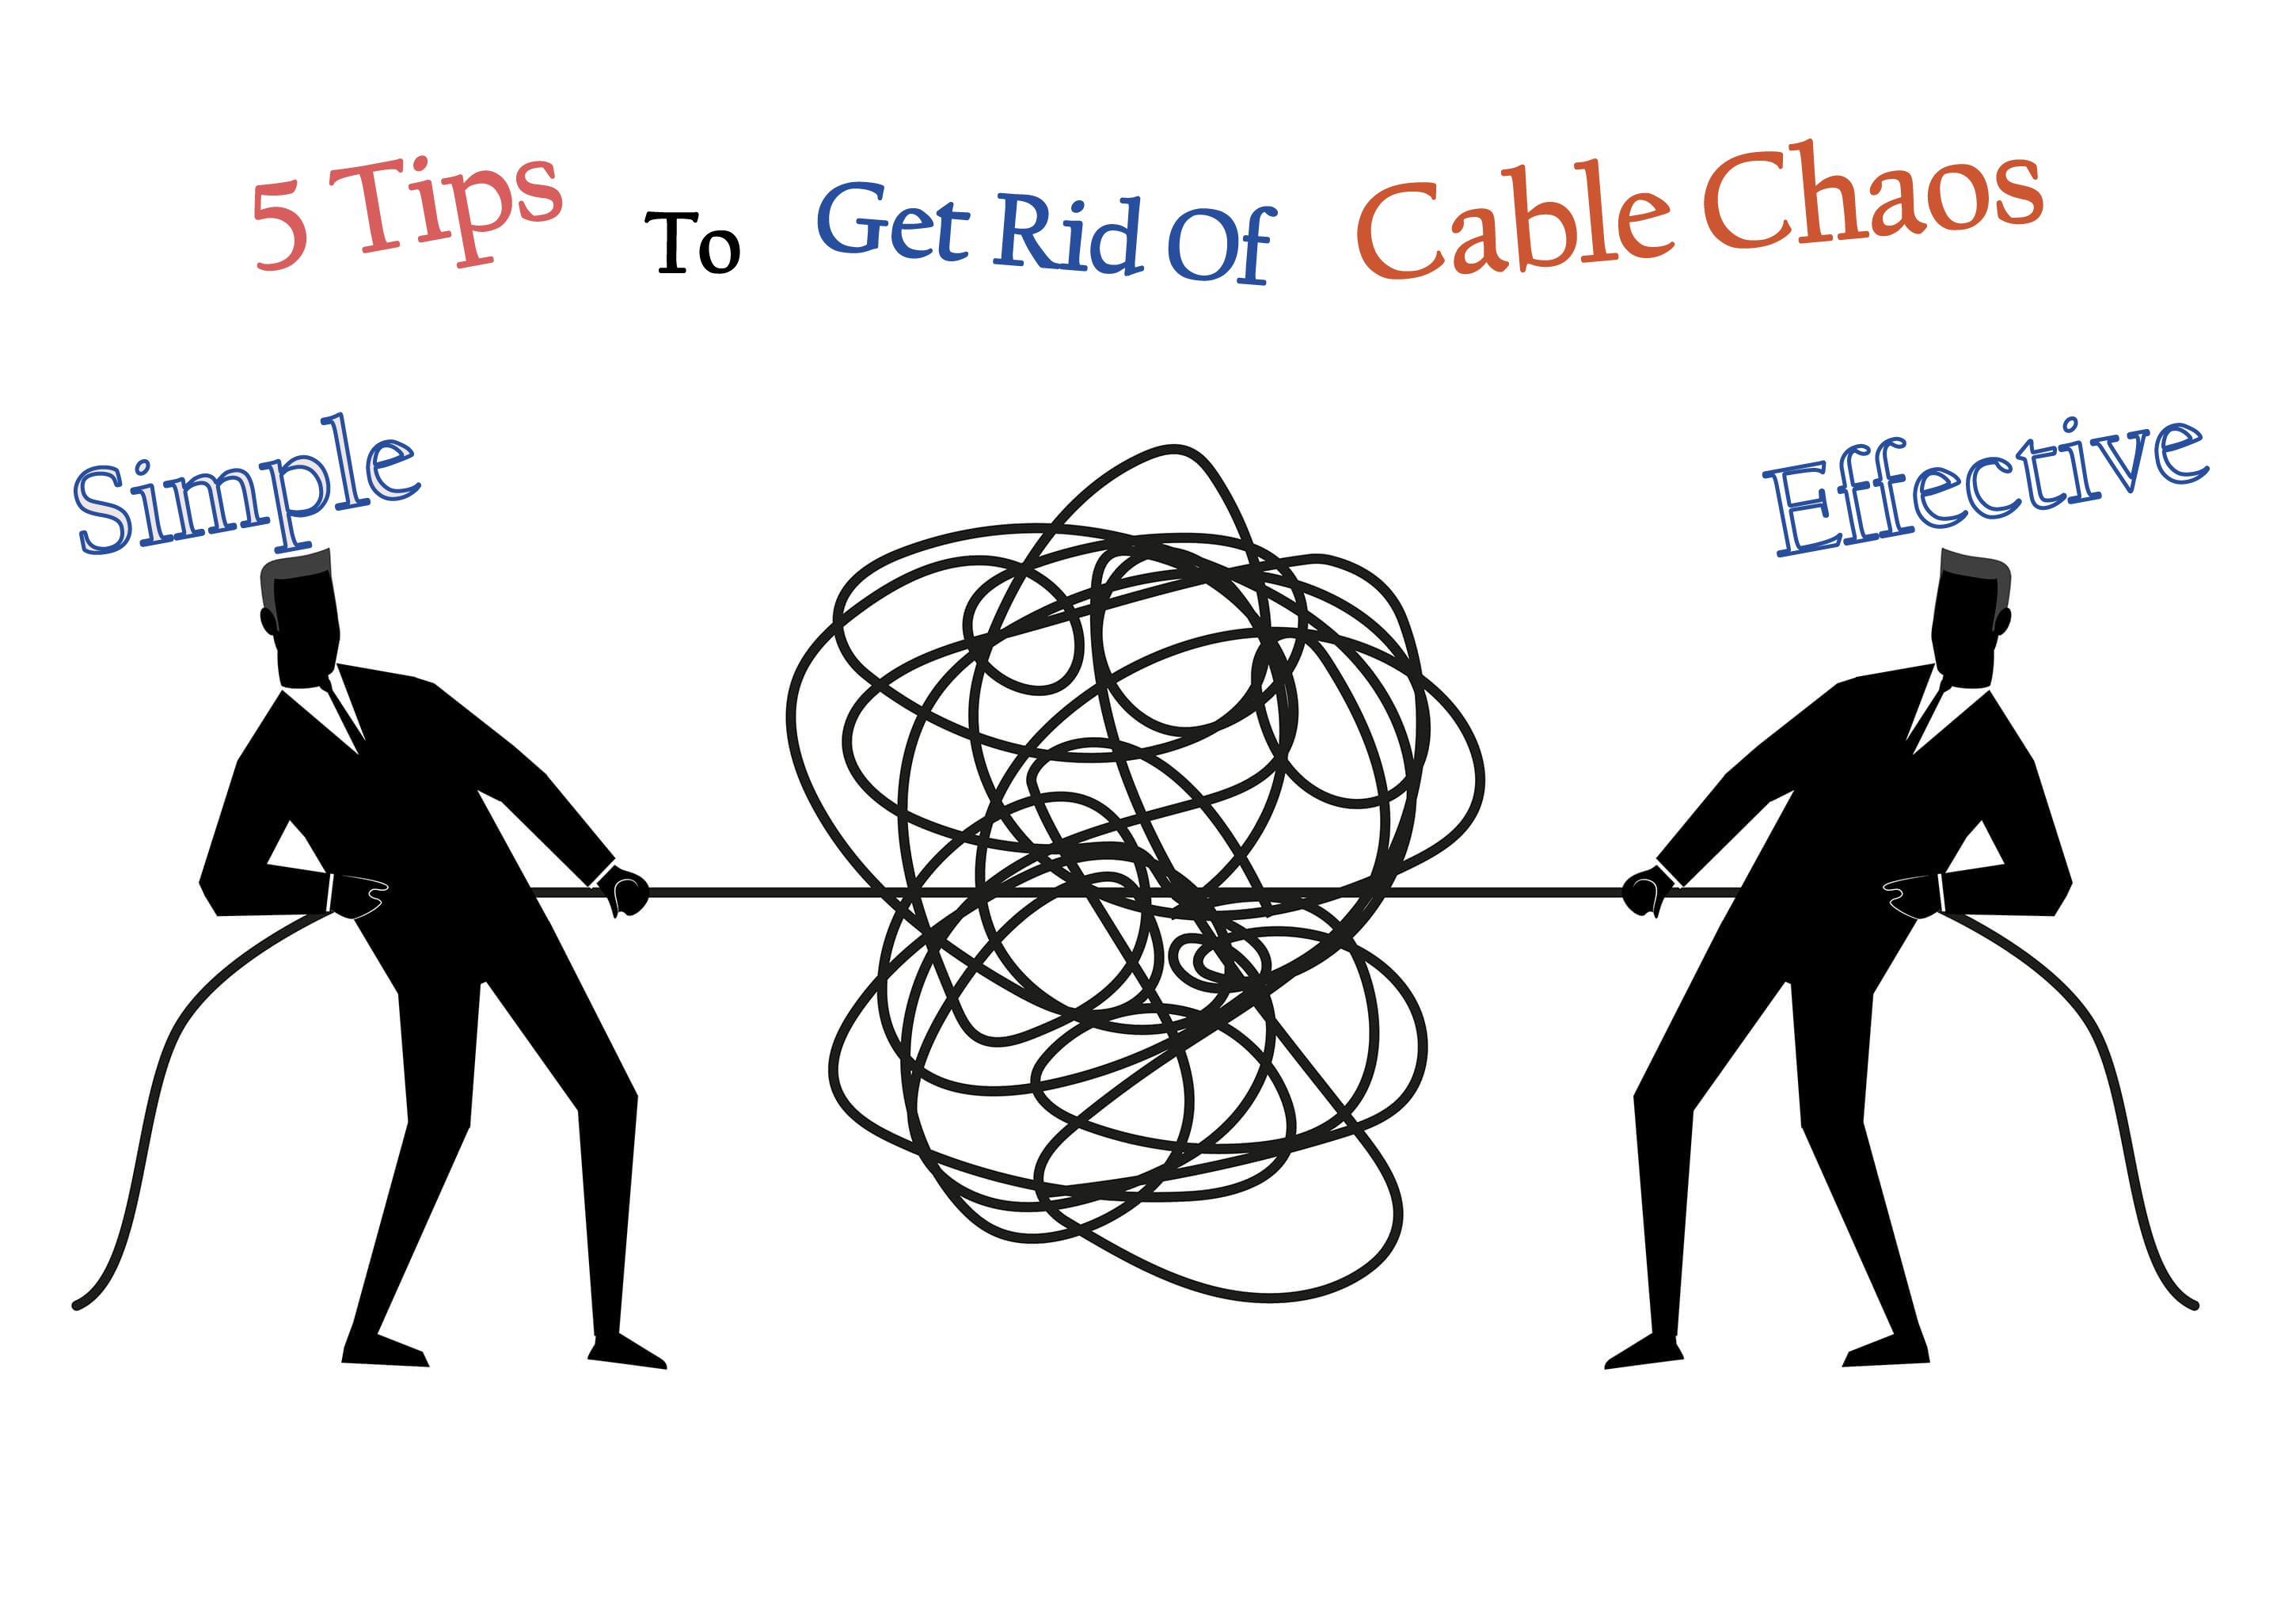 5 tips to get rid of cable chaos